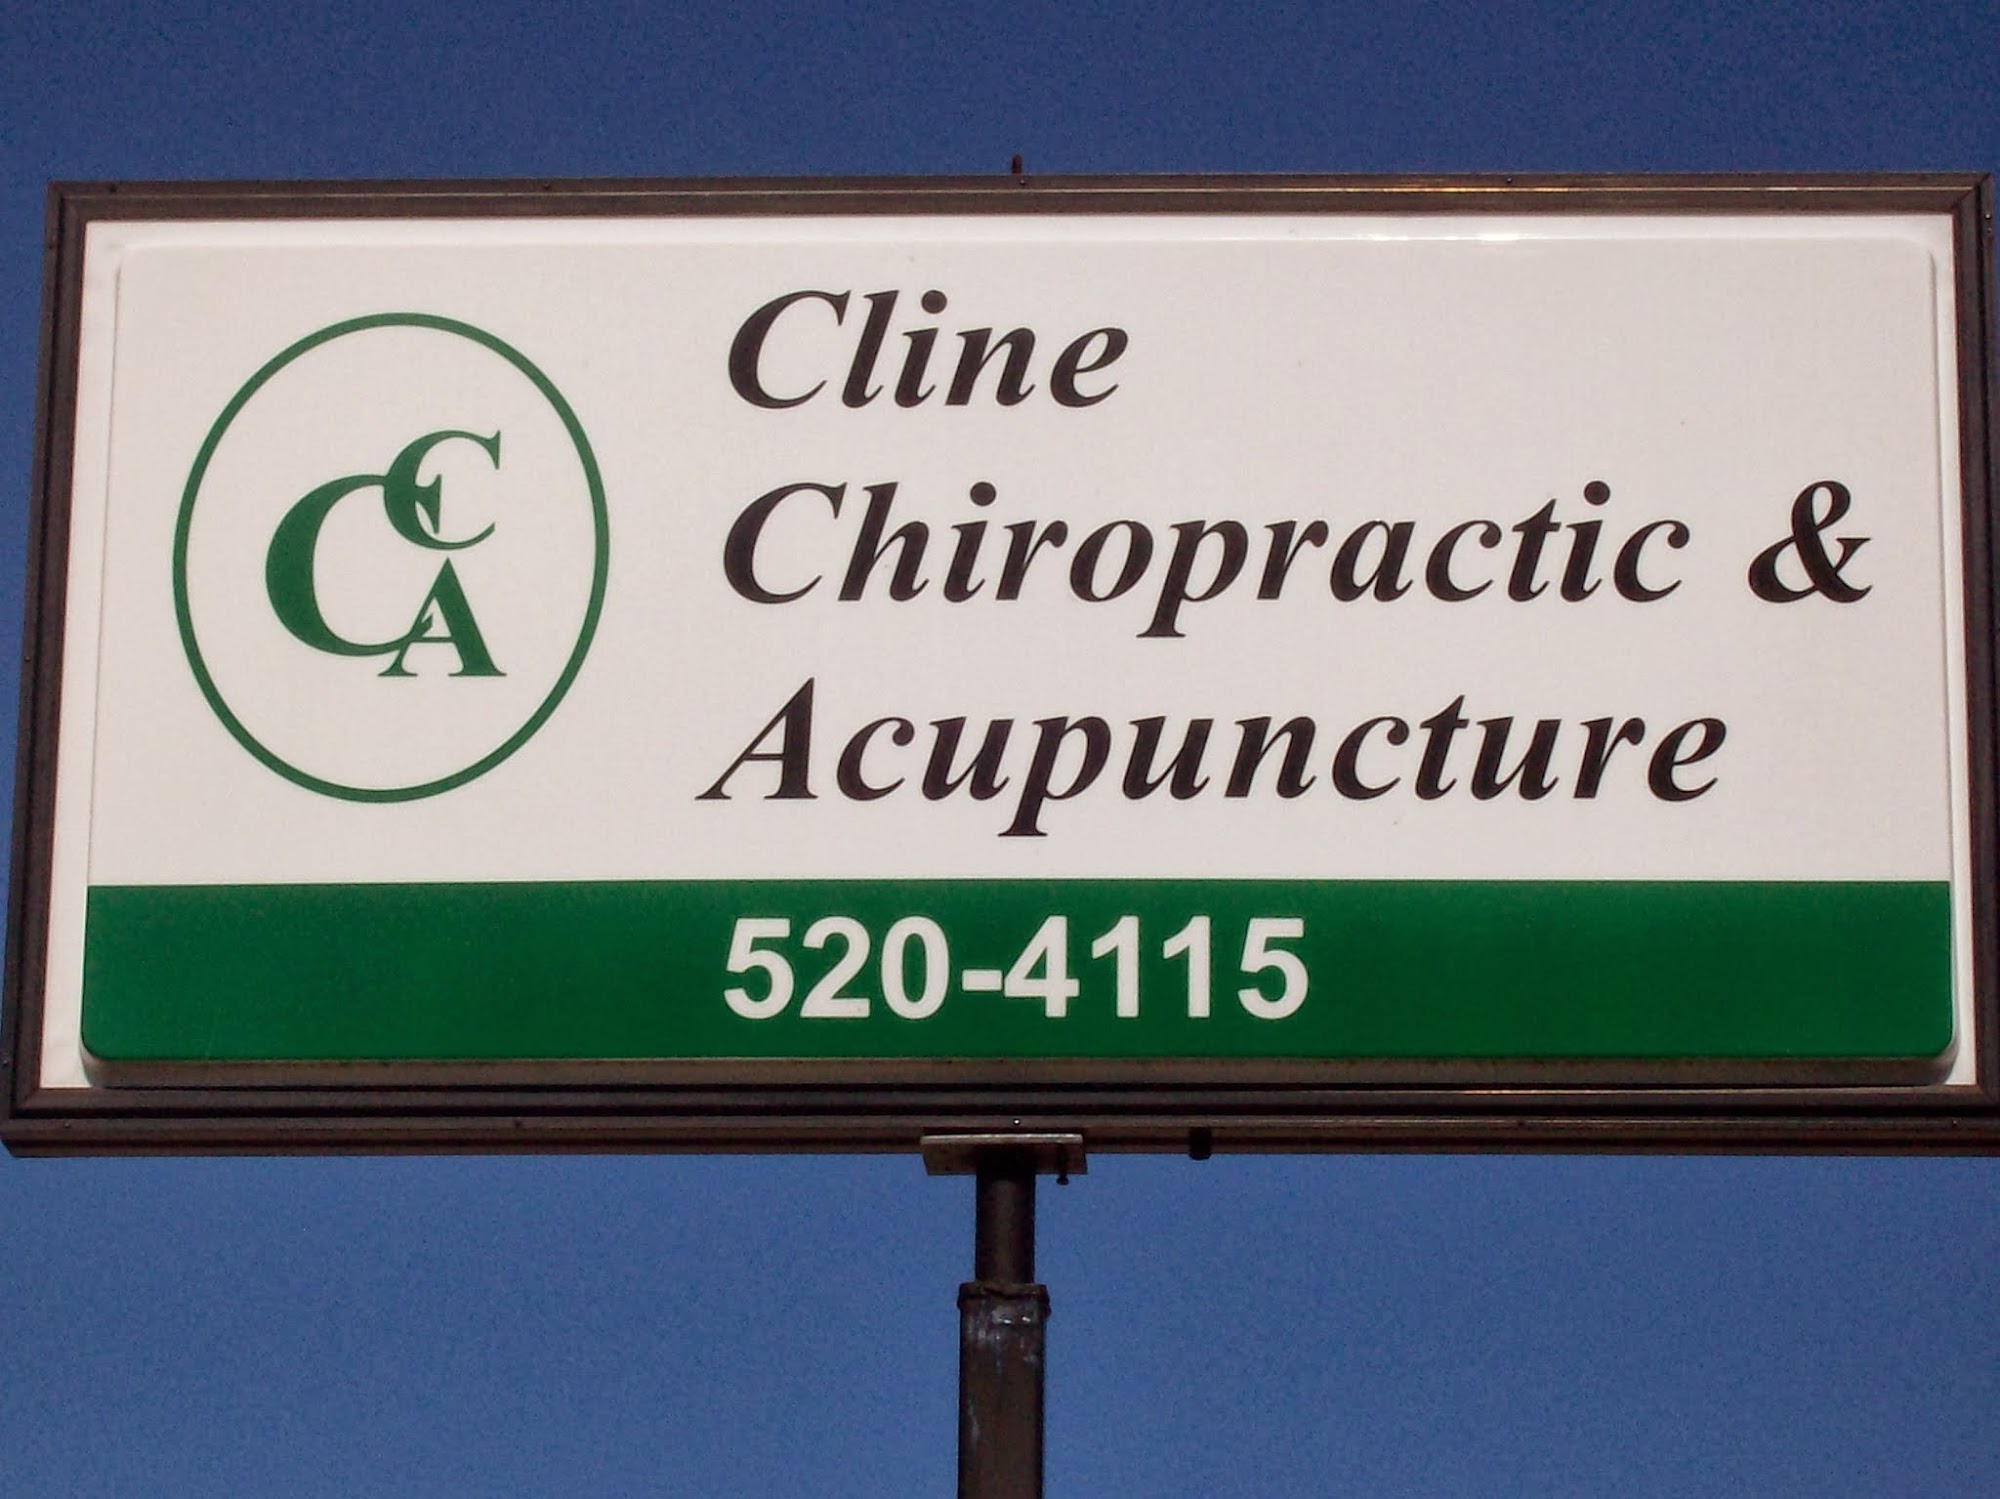 Cline Chiropractic and Acupuncture